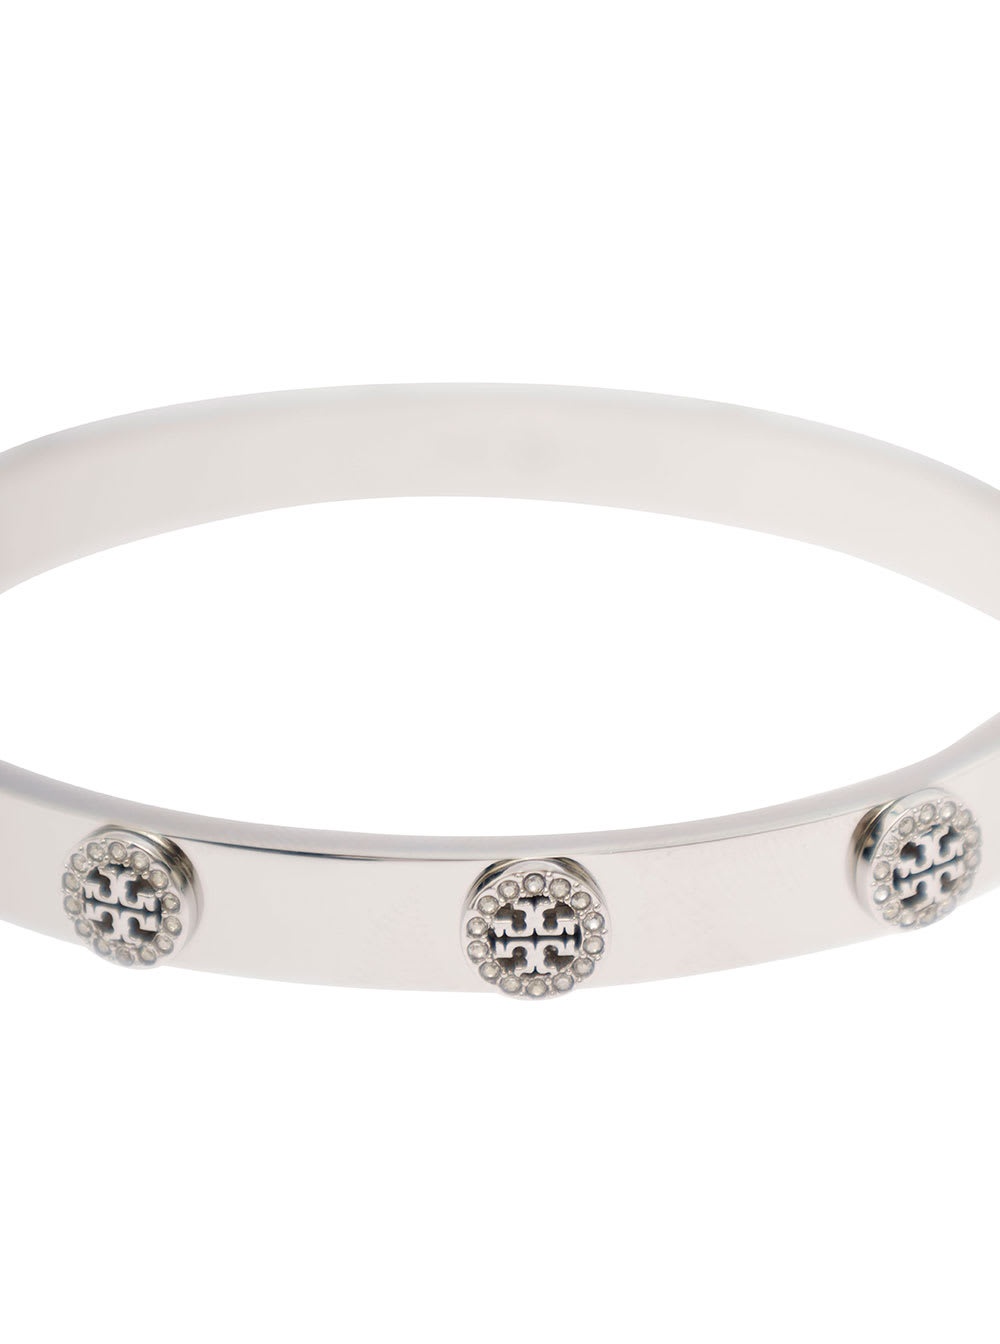 Shop Tory Burch Silver Tone Bracelet With Logo Studs In Stainless Steel And Cubic Zirconia Woman In Metallic